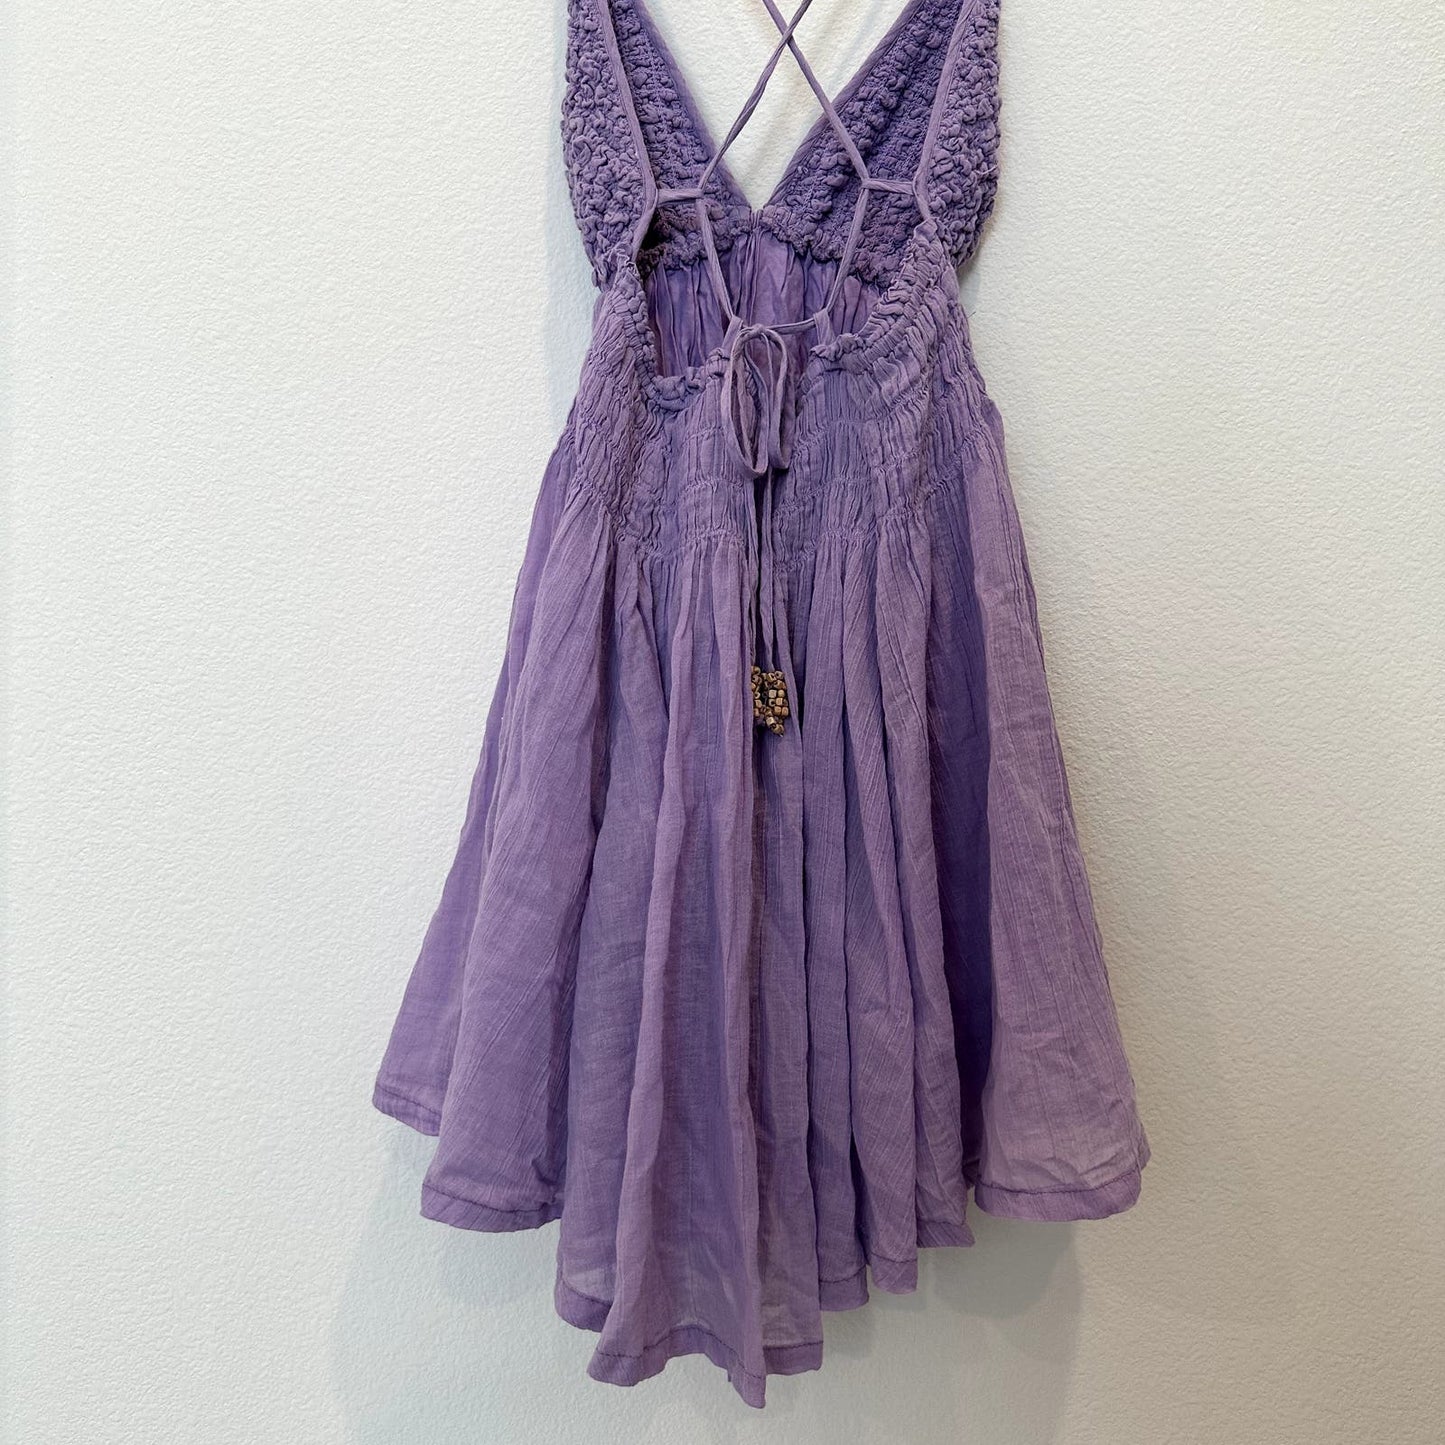 Free People Forever Favorite Mini Dress Endless Summer Thistle Patch lavender dress